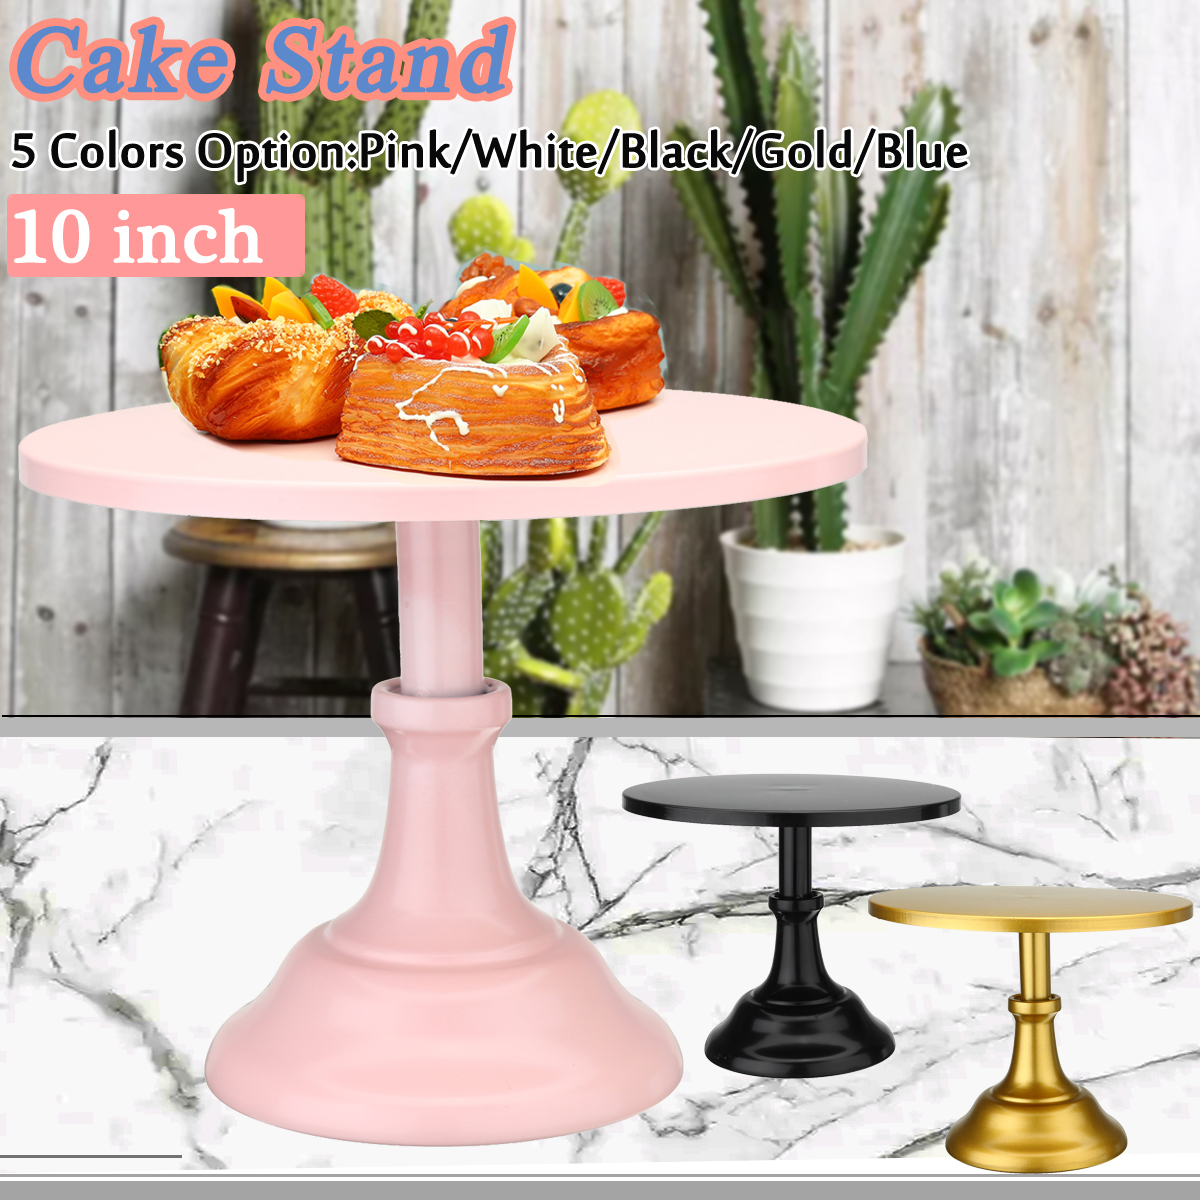 10-Inch-Cake-Stand-White-Simple-Style-Fruit-Dessert-Rack-Desktop-Decorations-Serving-Tray-1426216-1